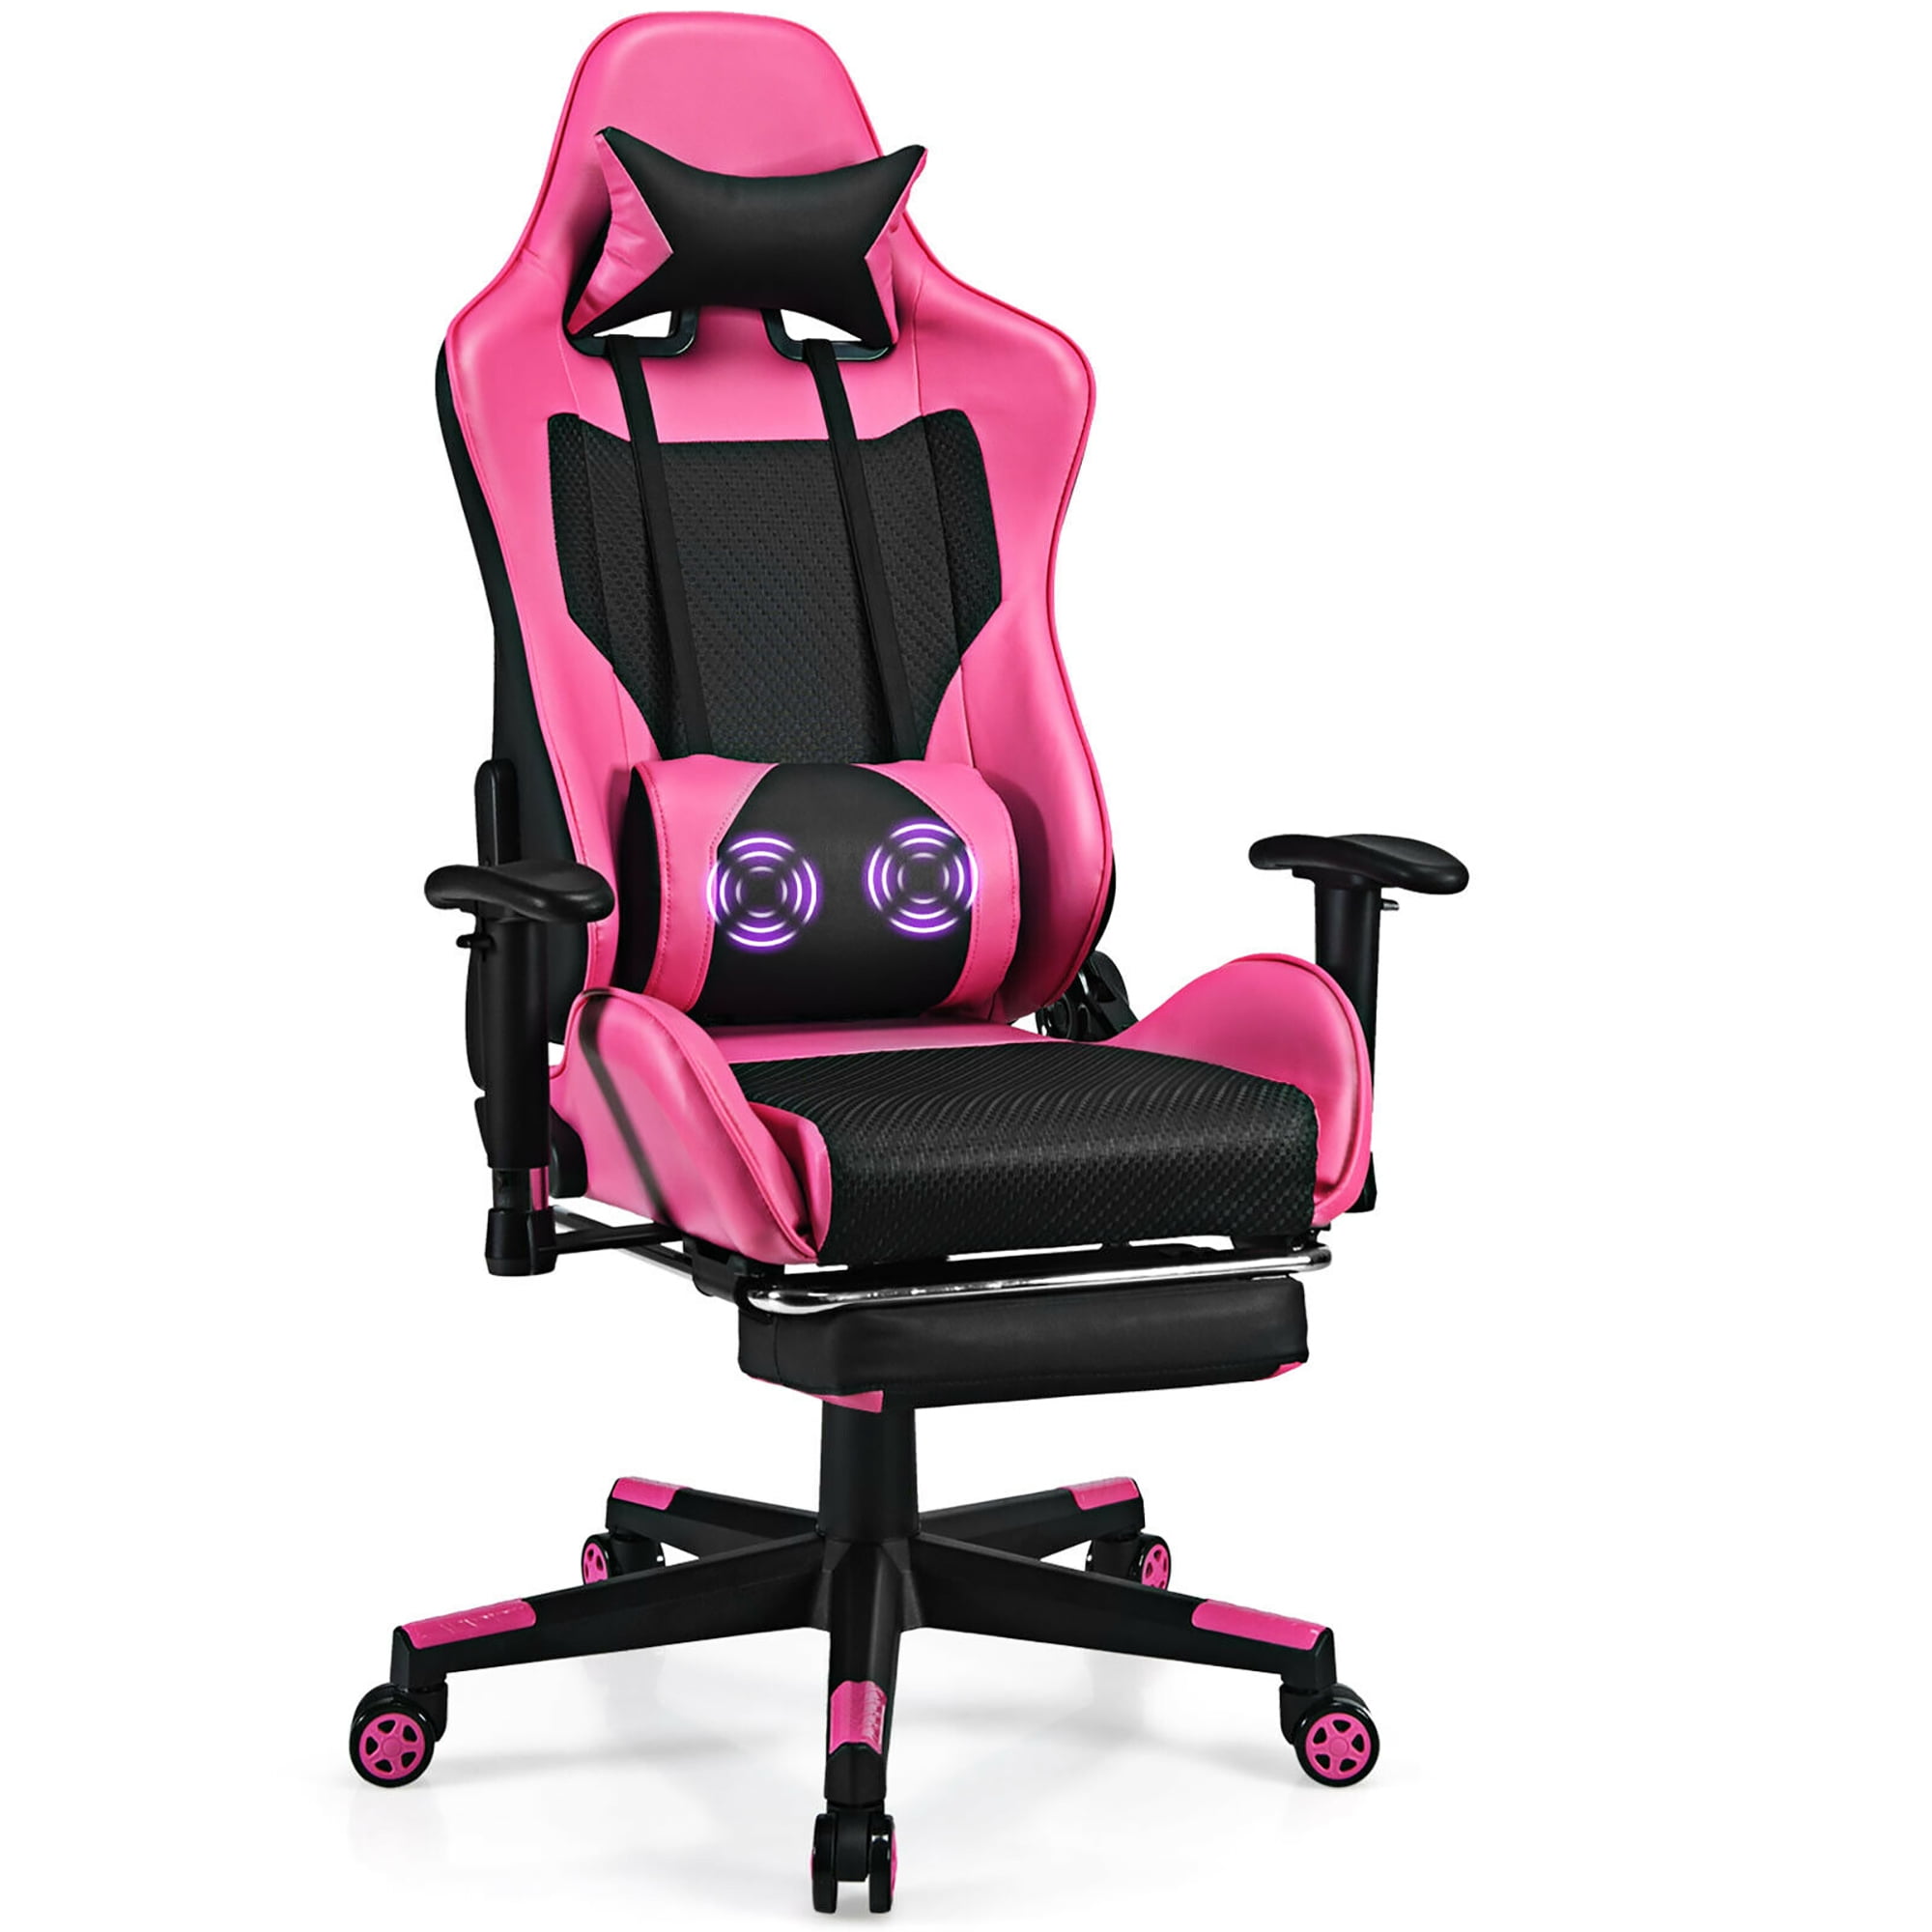 Costway 84703512 Massage Gaming Chair with Footrest Pink for sale online 